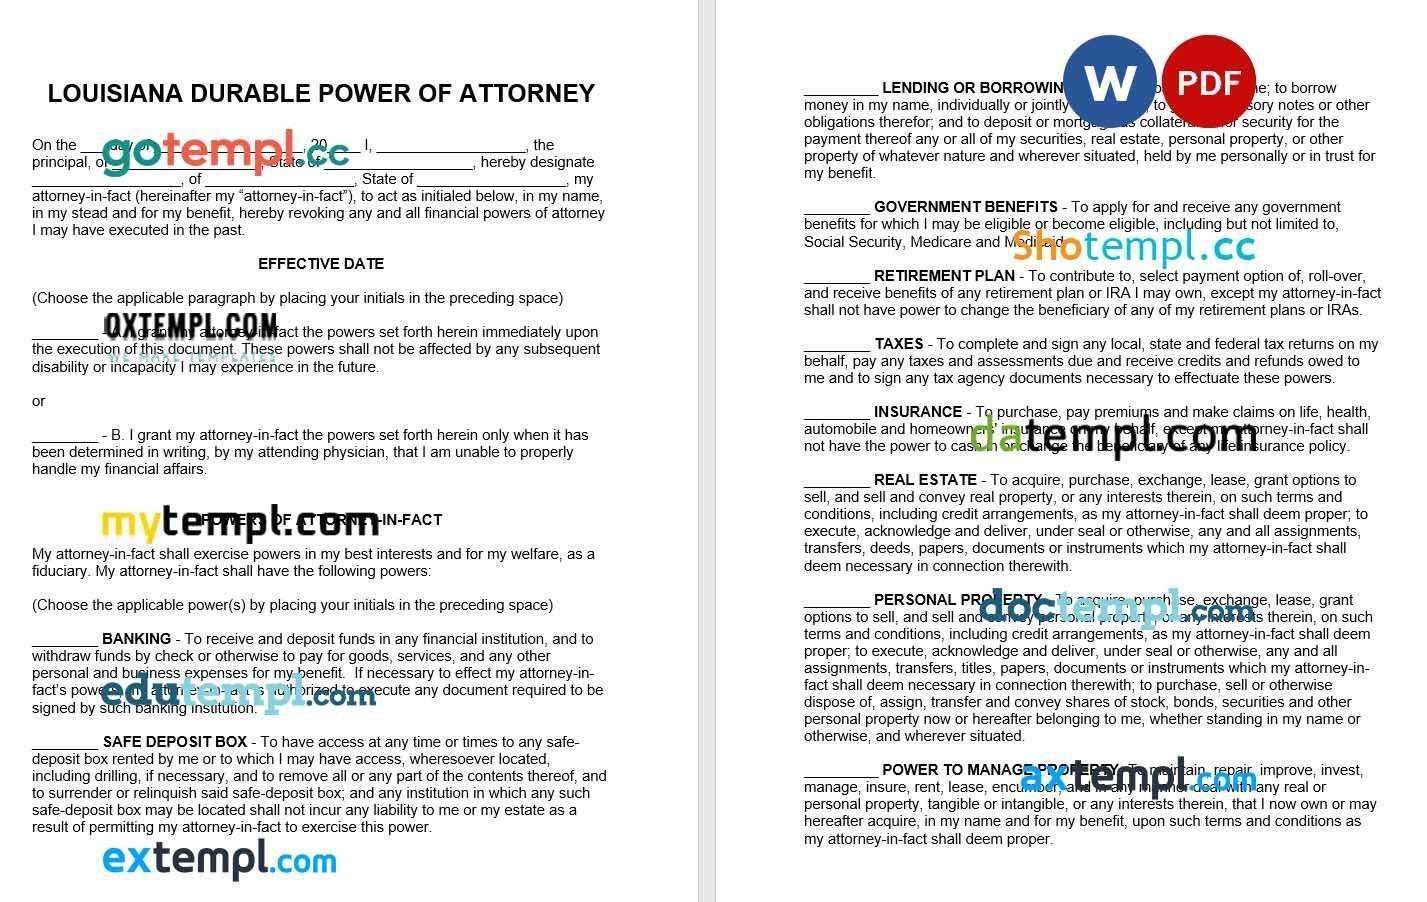 Louisiana Durable Power of Attorney Form example, fully editable